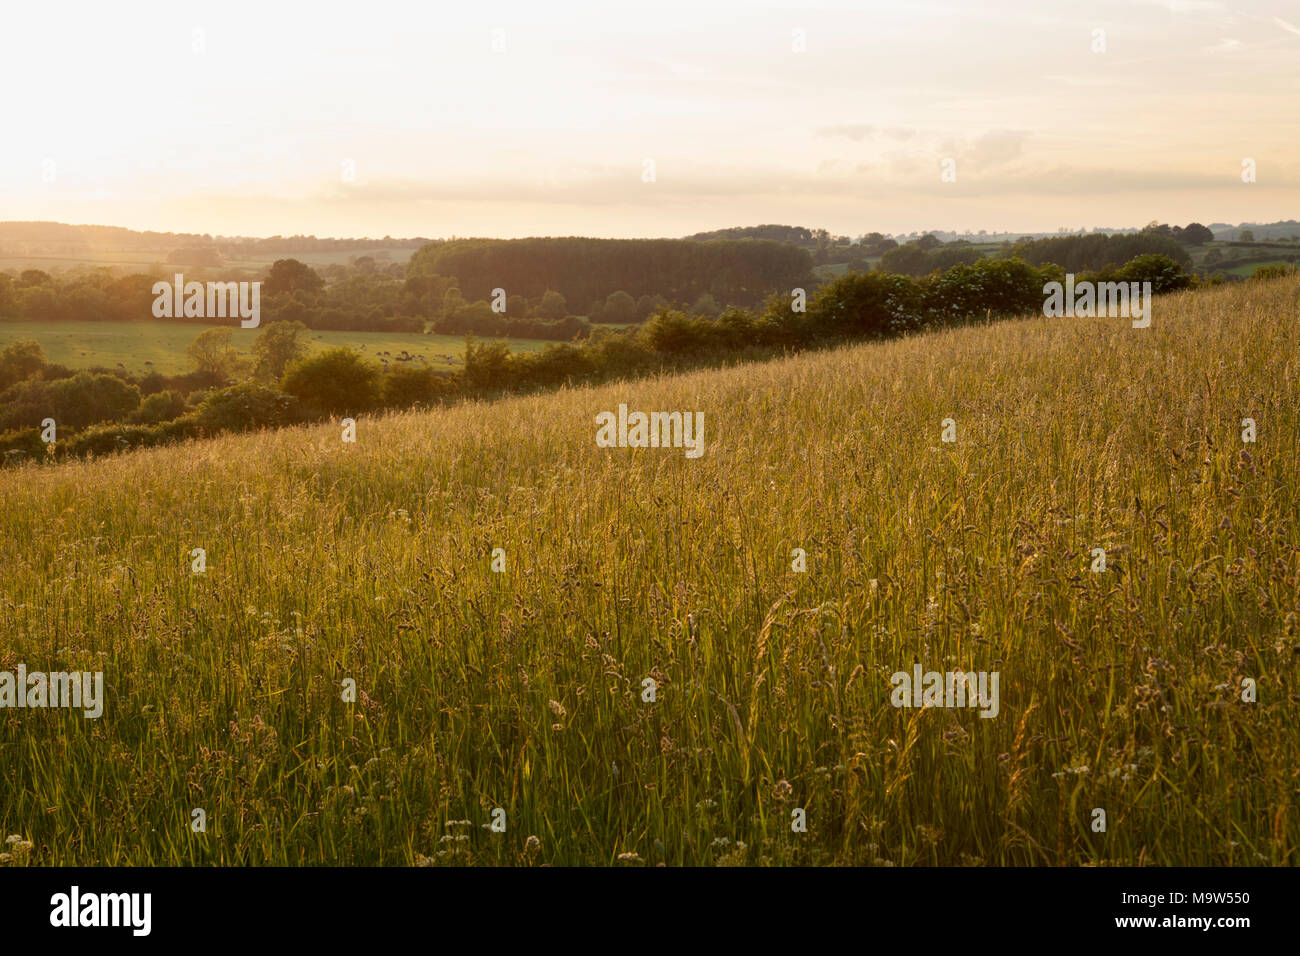 On the slopes of a grassland meadow bathed in golden evening light on the edge of the Brampton valley at Brixworth in Northamptonshire, England. Stock Photo